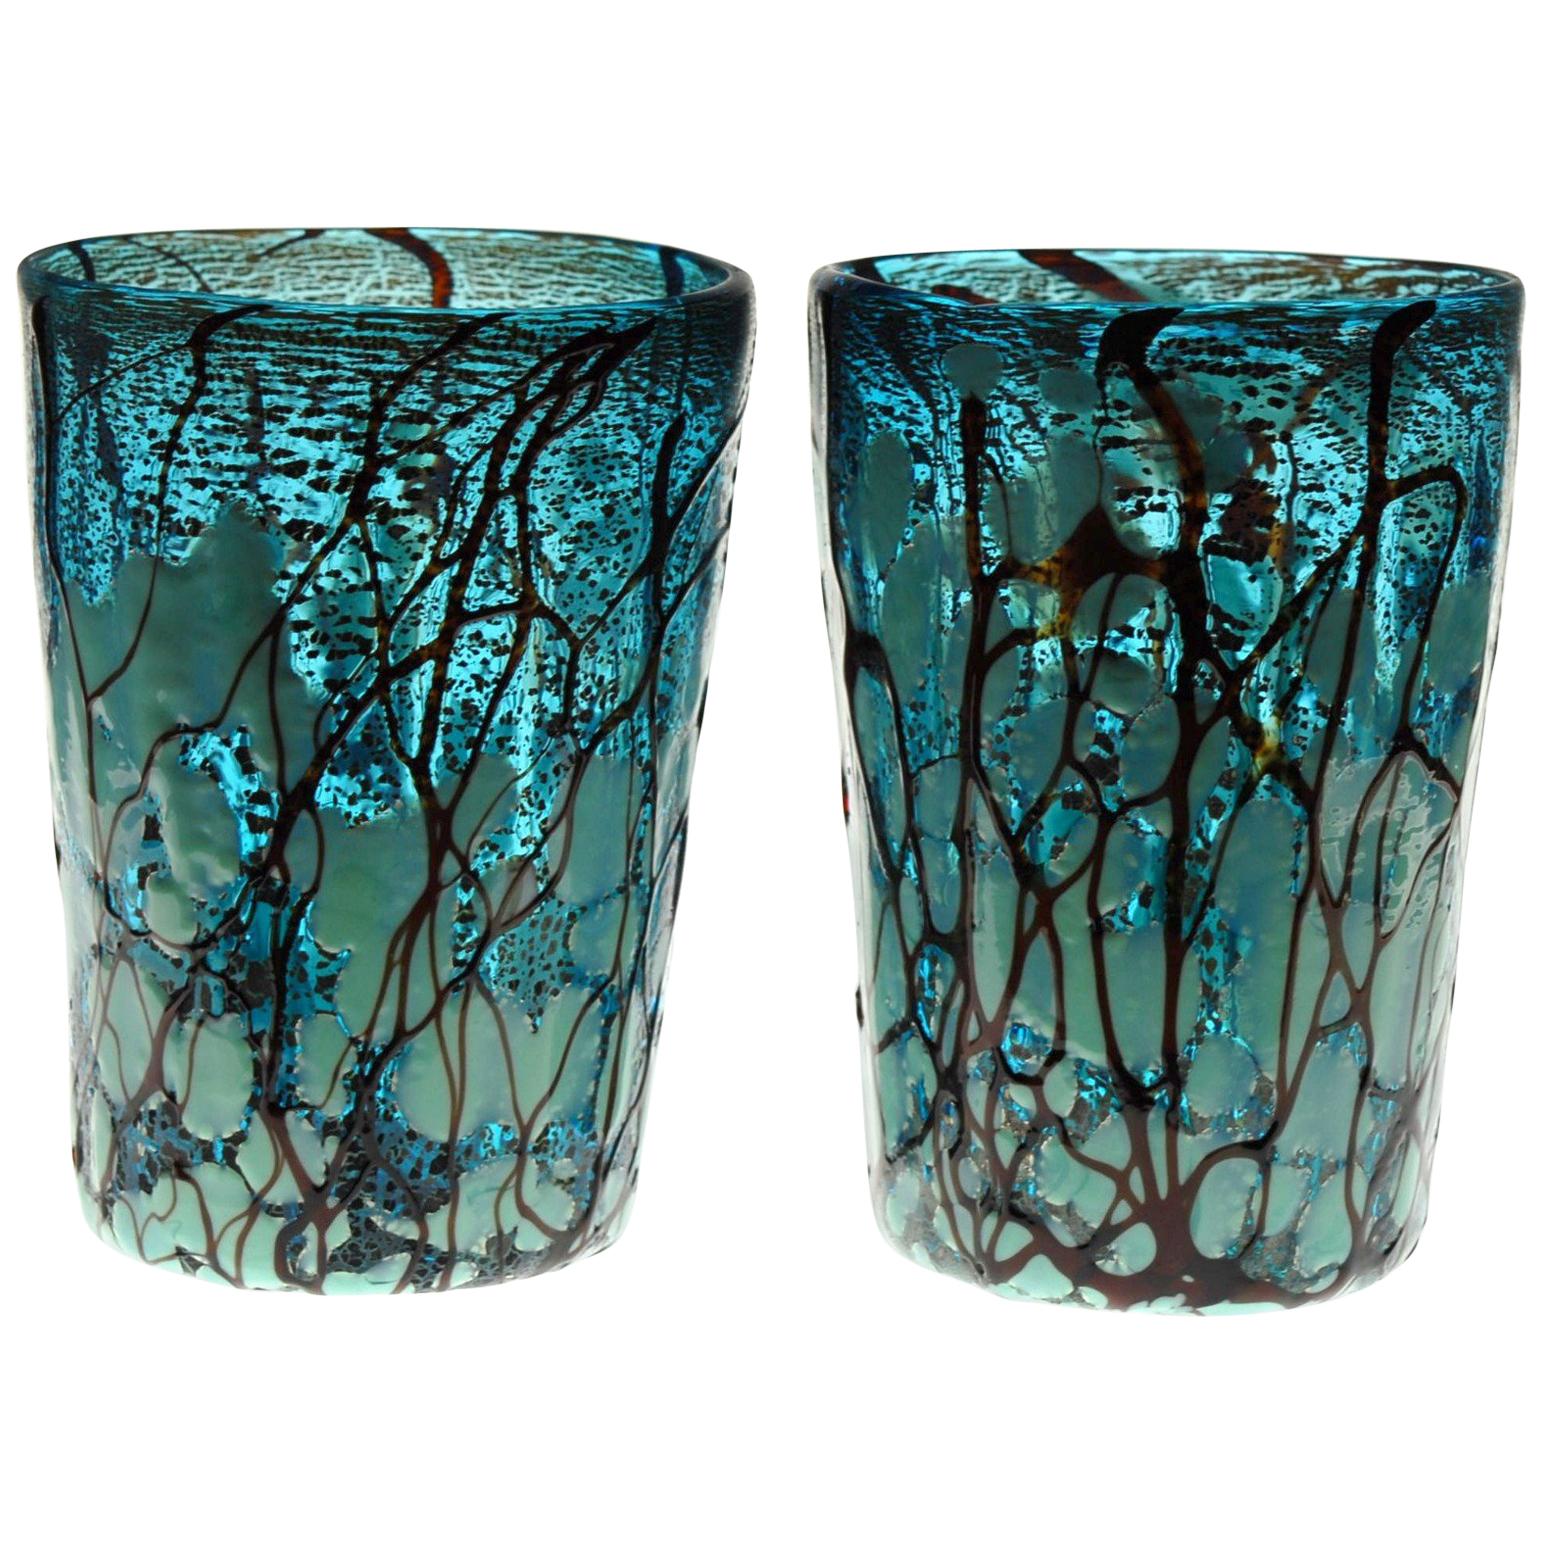 Amadi, Set of Two Tumblers, Murano Acquamarine with Relief Design, Silver Leaf